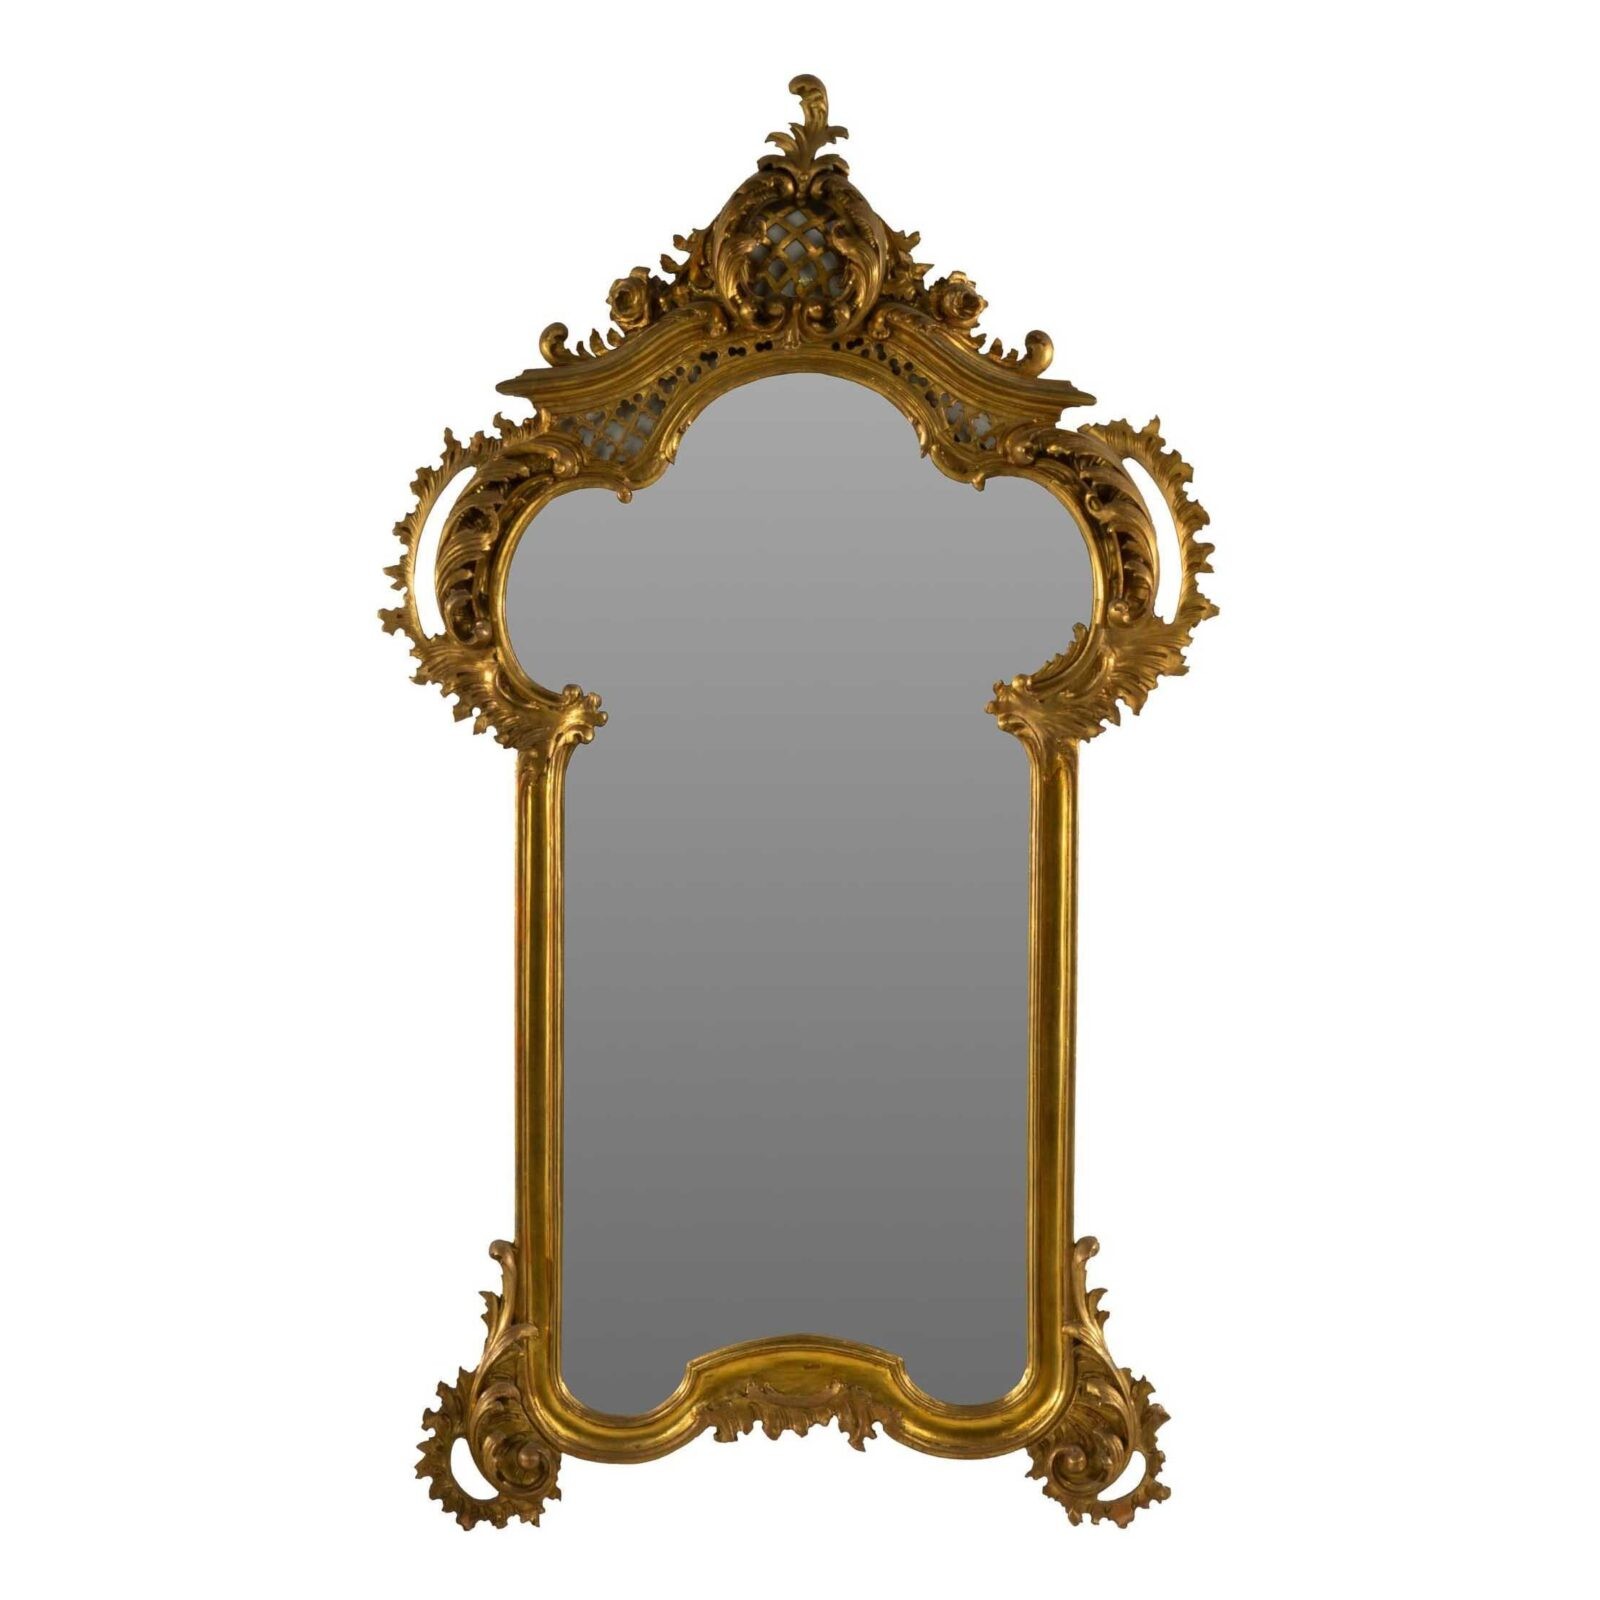 Italian Rococo-style wall mirror with elaborate gilt foliate carvings and a shaped giltwood frame, which sold for $2,100 plus the buyer’s premium in May 2024. Image courtesy of Vogt Auction Texas and LiveAuctioneers.